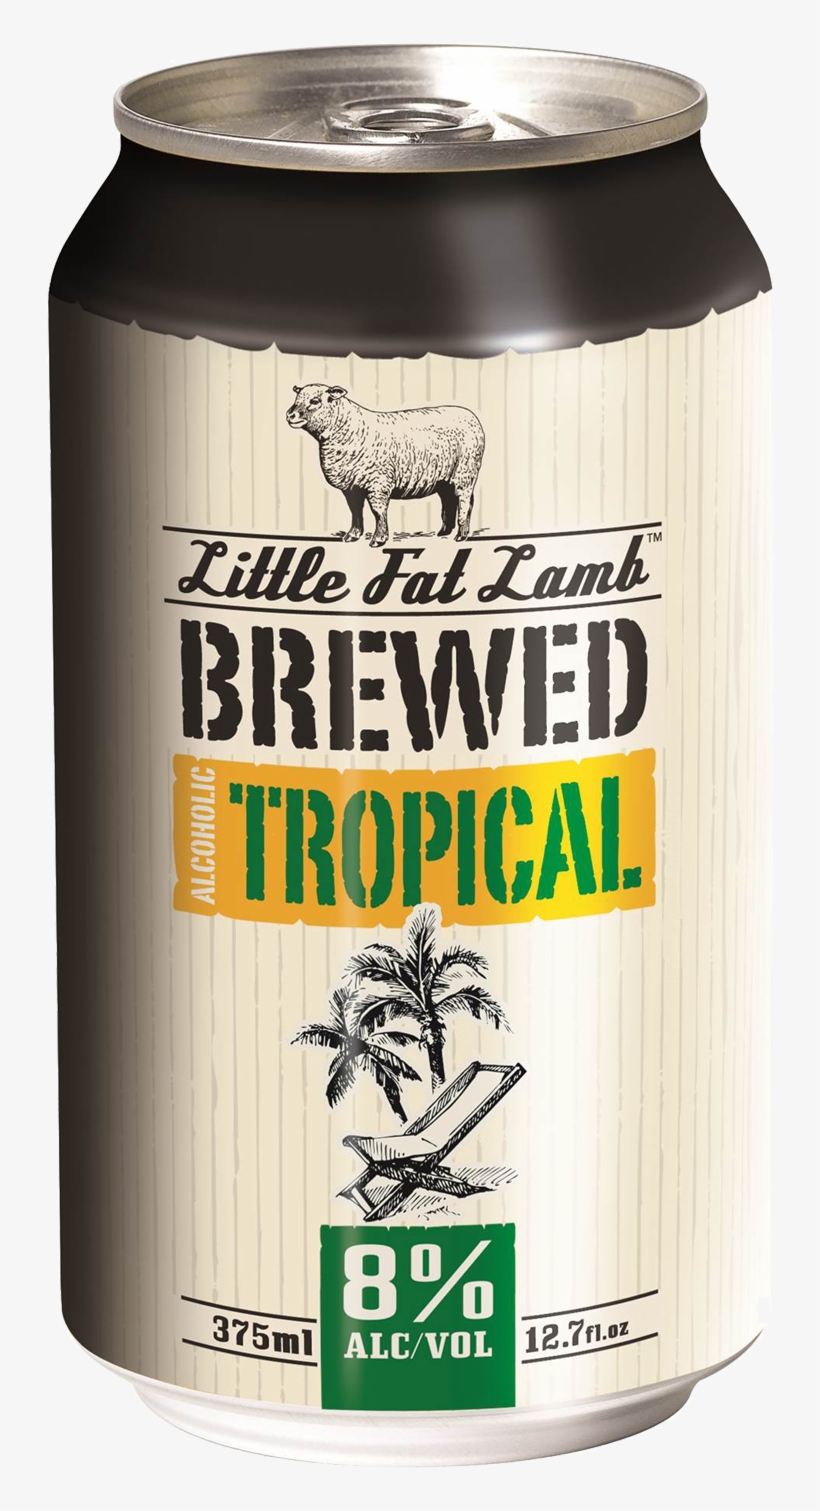 Little Fat Lamb Brewed Tropical Cans 10 Pack 375ml - Caffeinated Drink, transparent png #437678